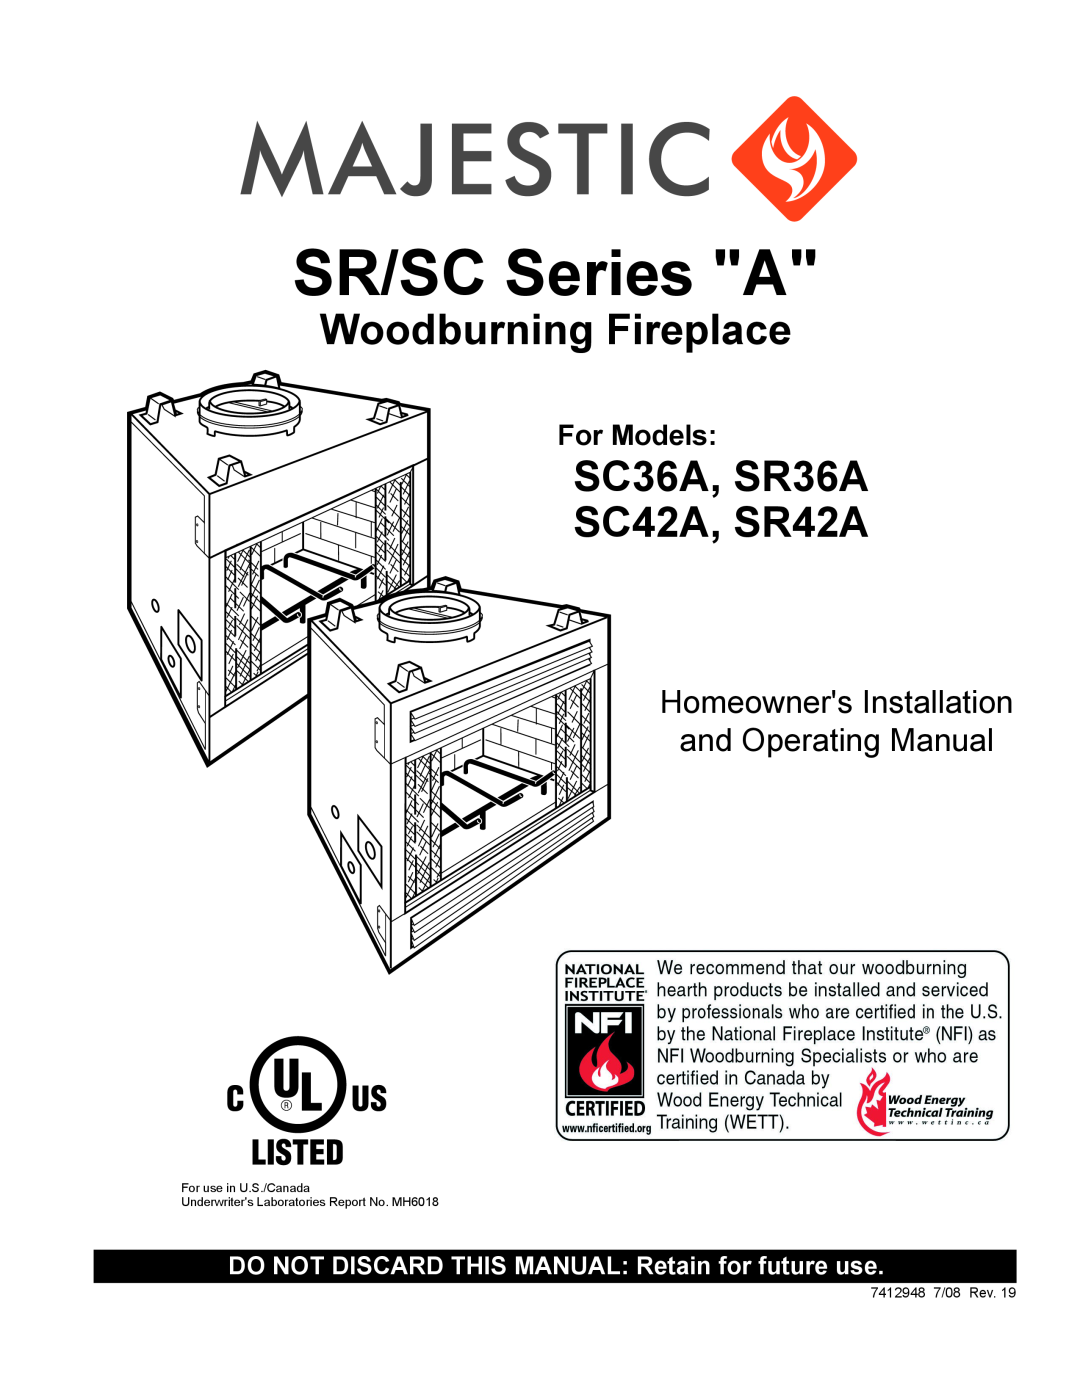 Majestic manual Woodburning Fireplace, SC36A, SR36A SC42A, SR42A, DO NOT DISCARD THIS MANUAL Retain for future use 